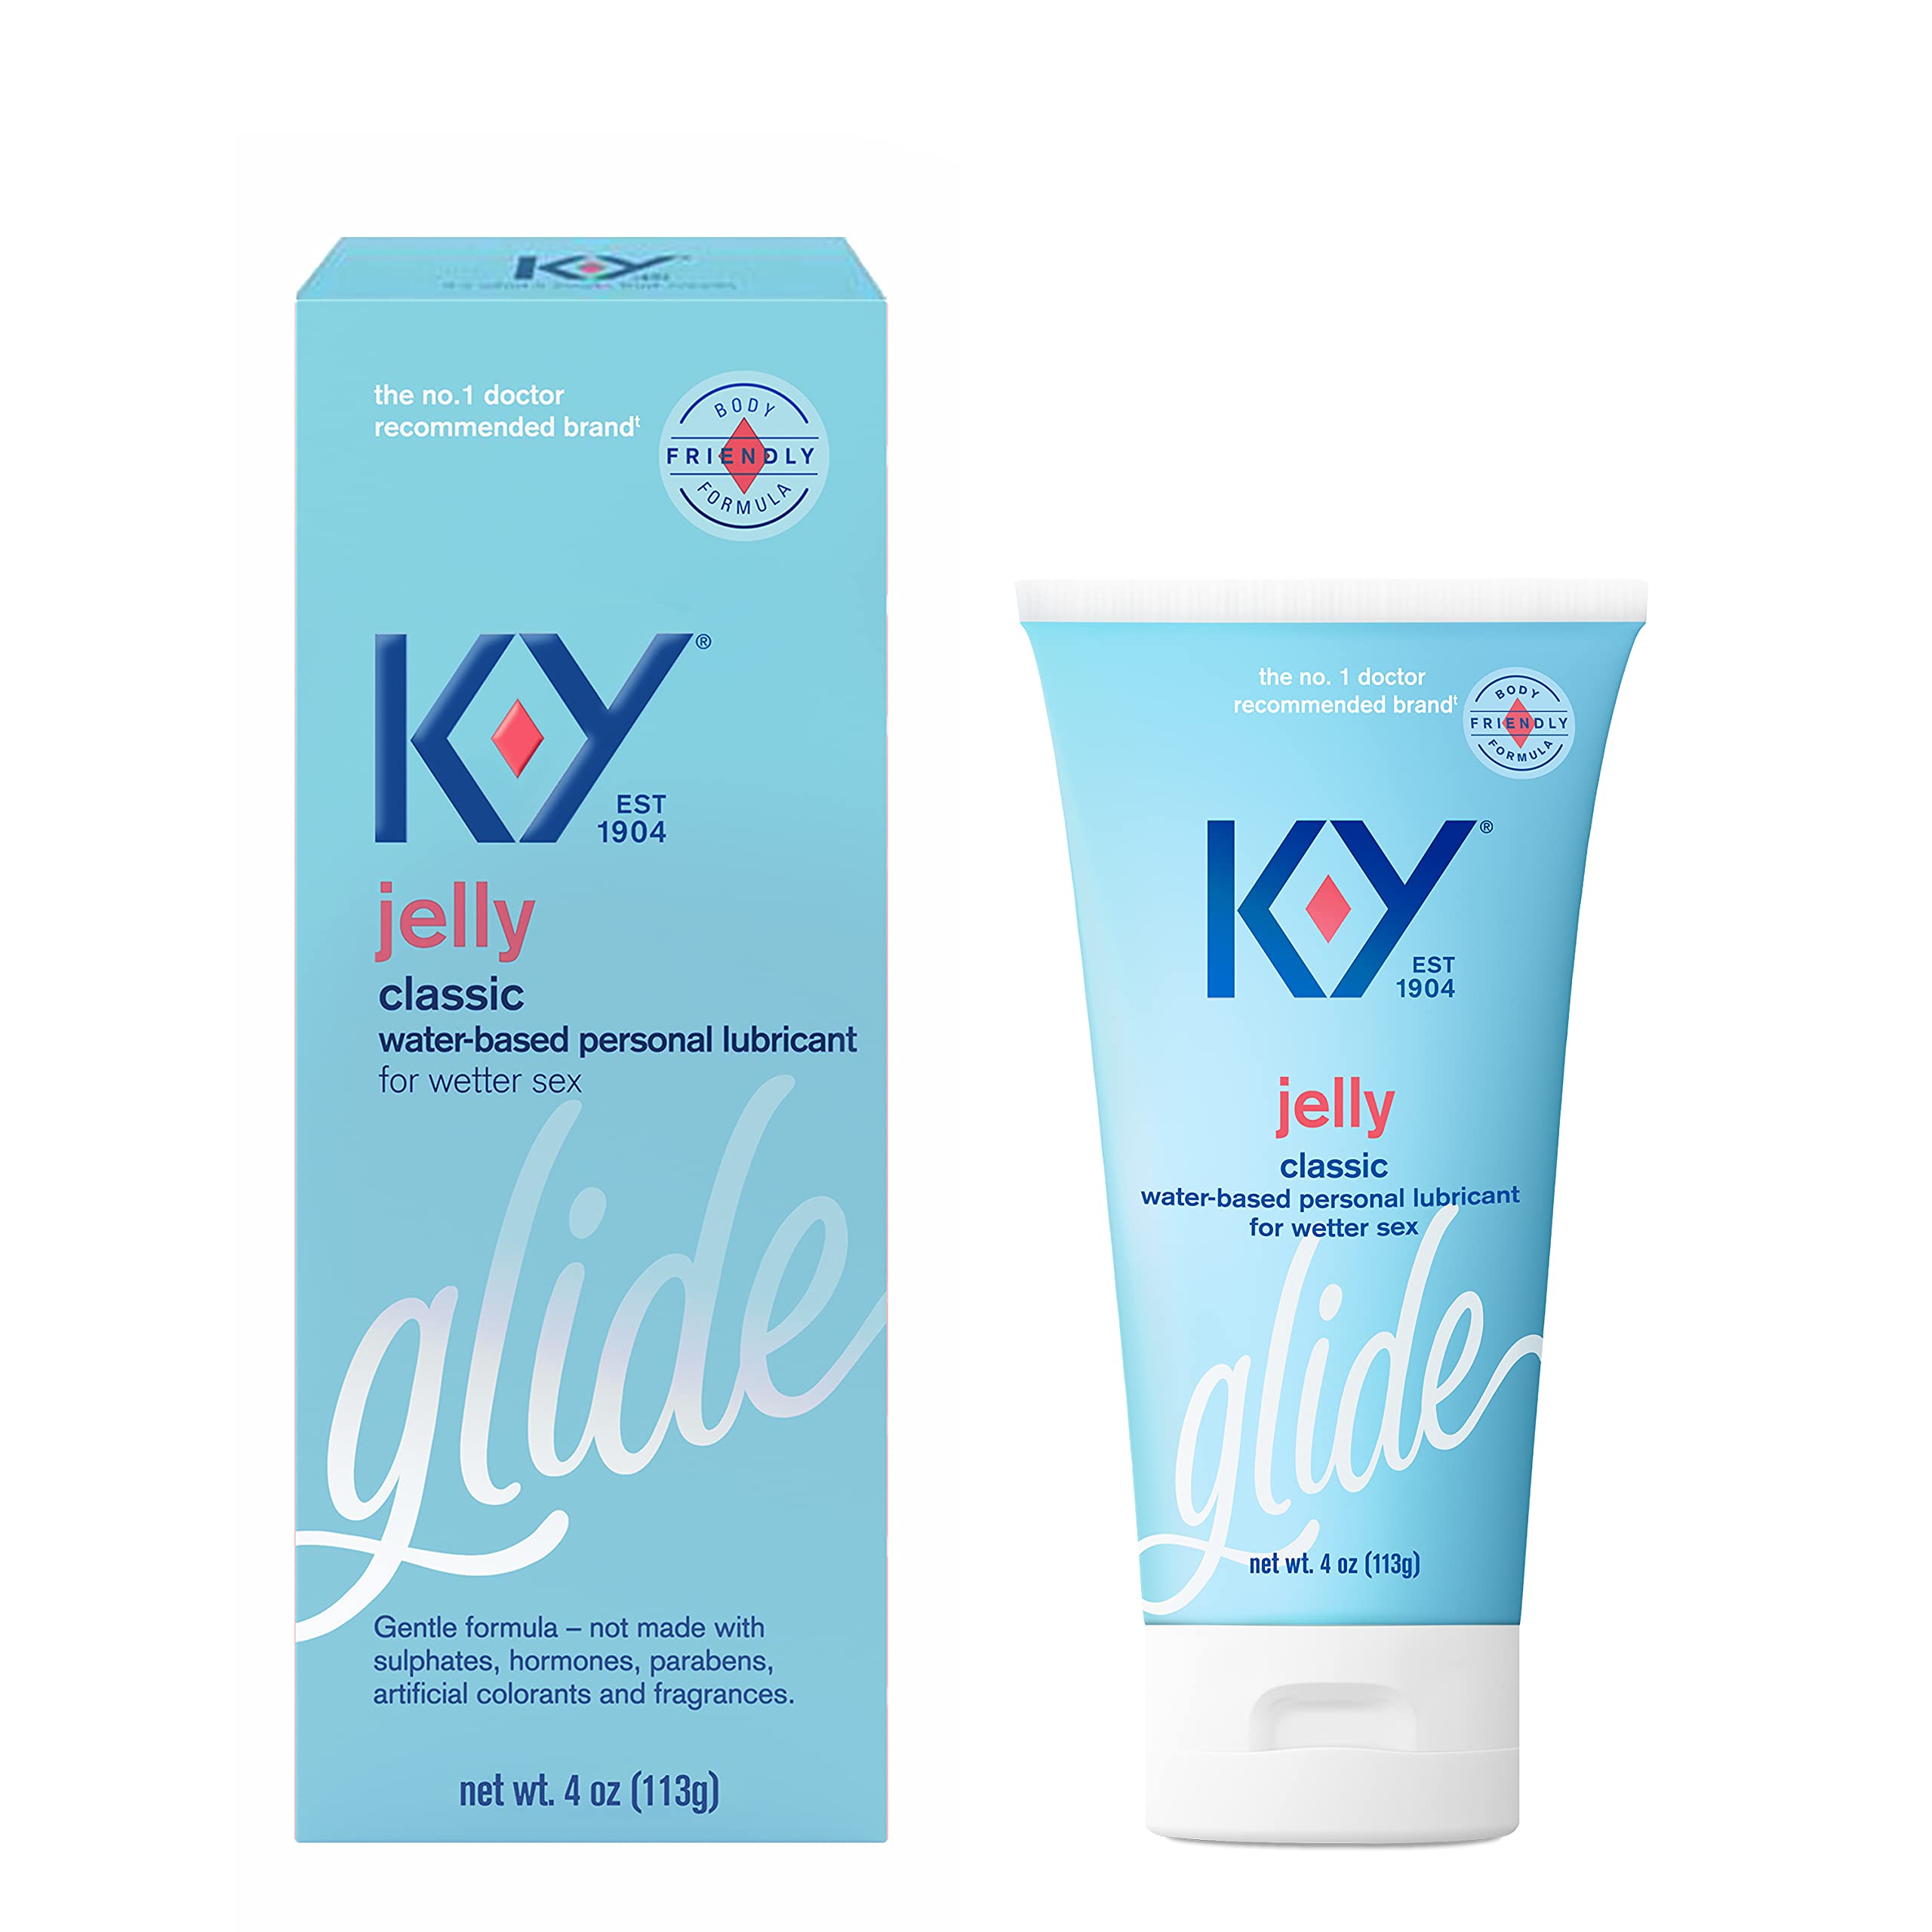 K-Y Jelly Lube, Personal Lubricant, Water-Based Formula, Safe to Use with Latex Condoms, For Men, Women and Couples, 4 FL OZ (Pack of 1)